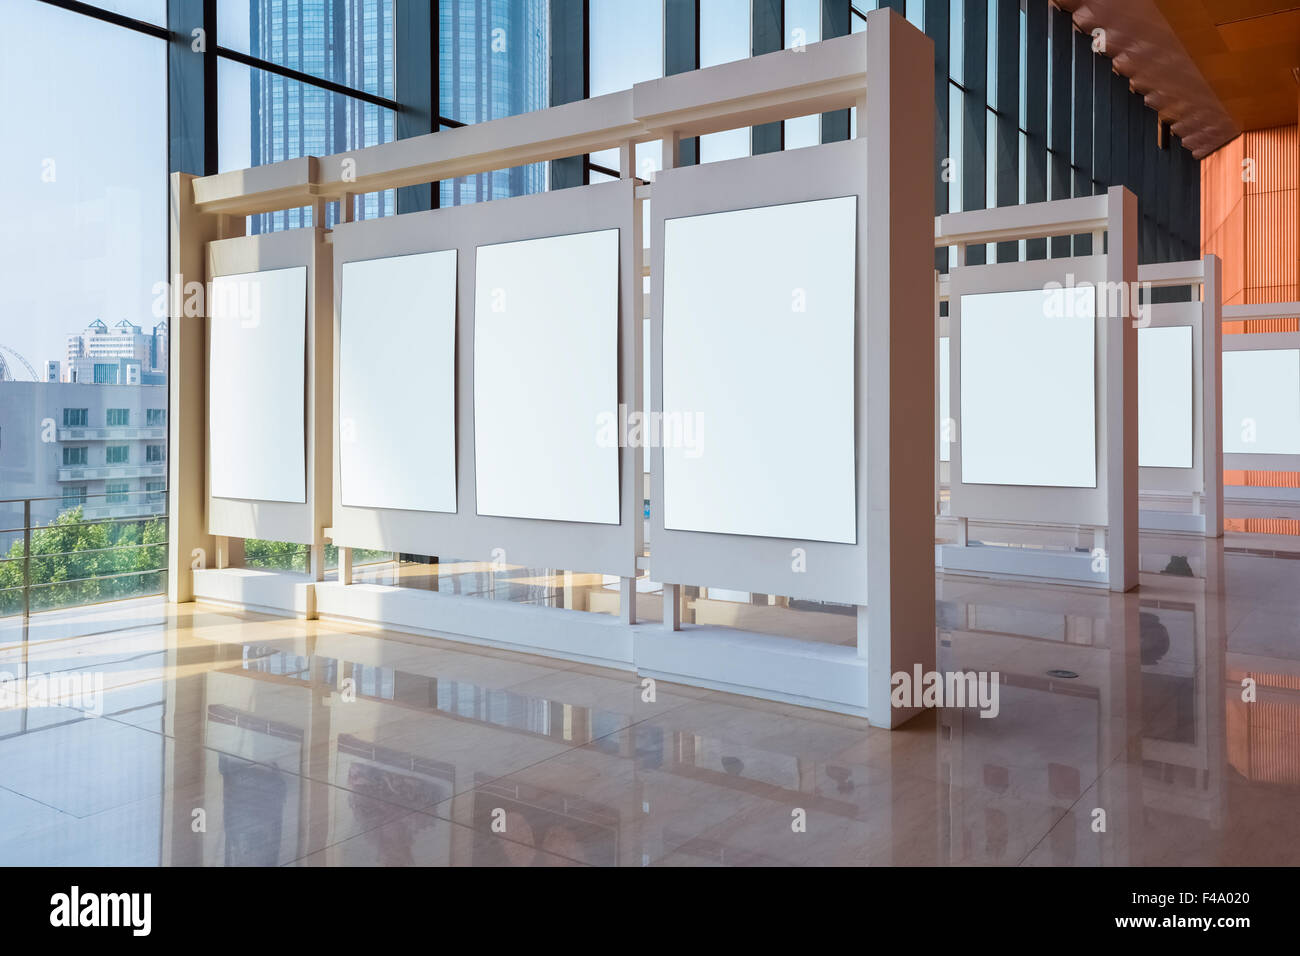 blank panel in exhibition hall Stock Photo